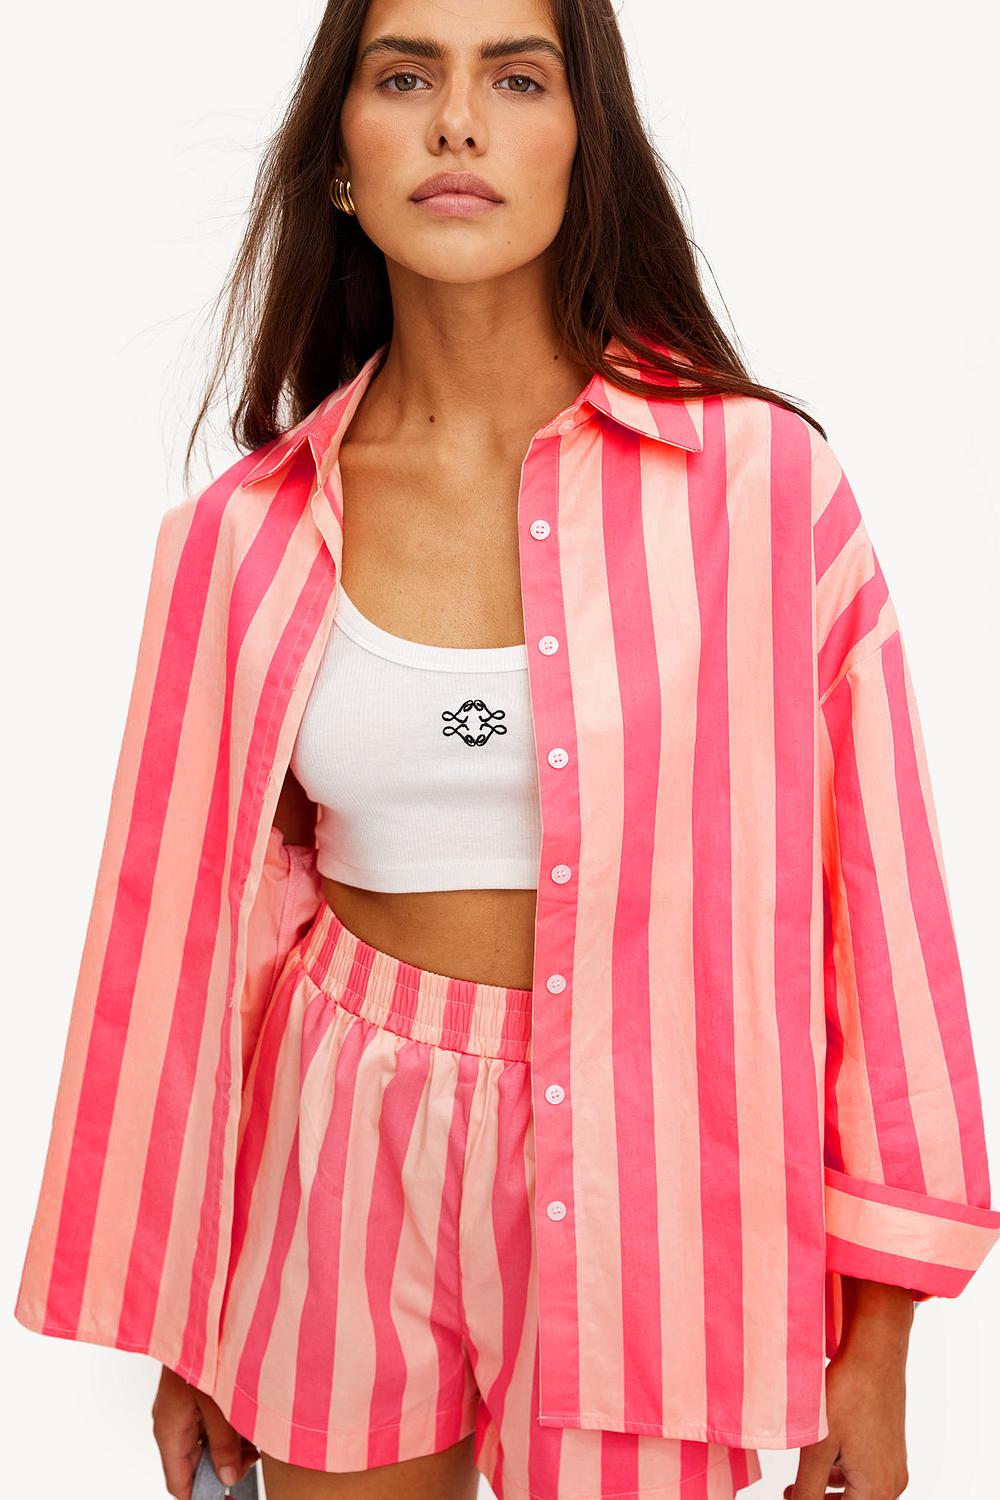 Pink blouse with stripes